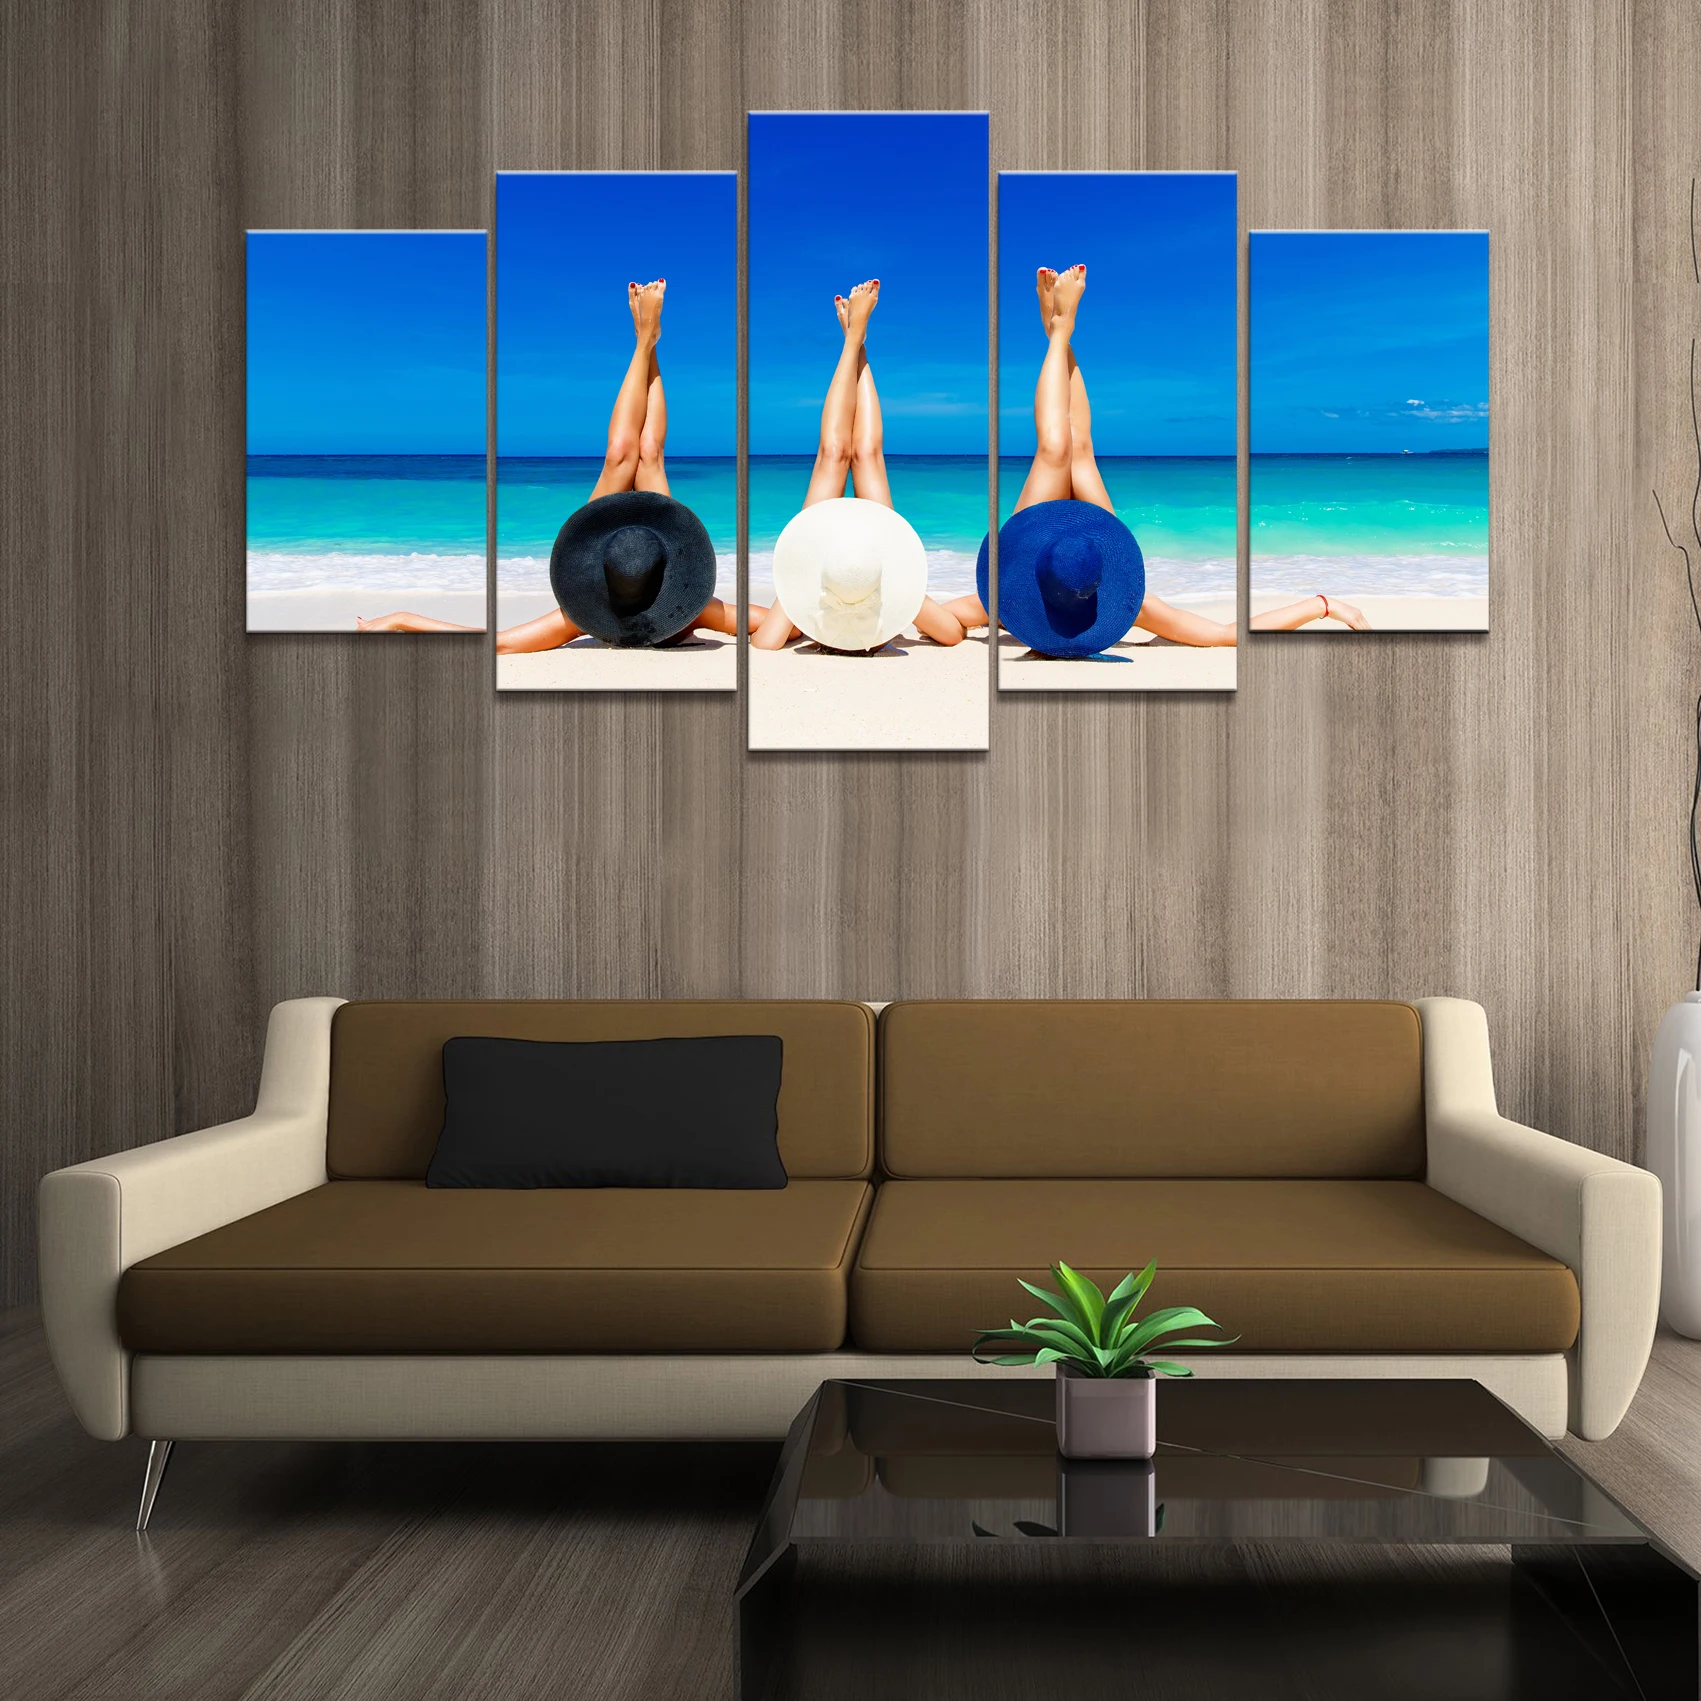 

Home Decor Poster HD Pictures Prints Canvas 5 Piece Modular Beach Sexy Women Scenery Living Room Art Decorative Painting Framed